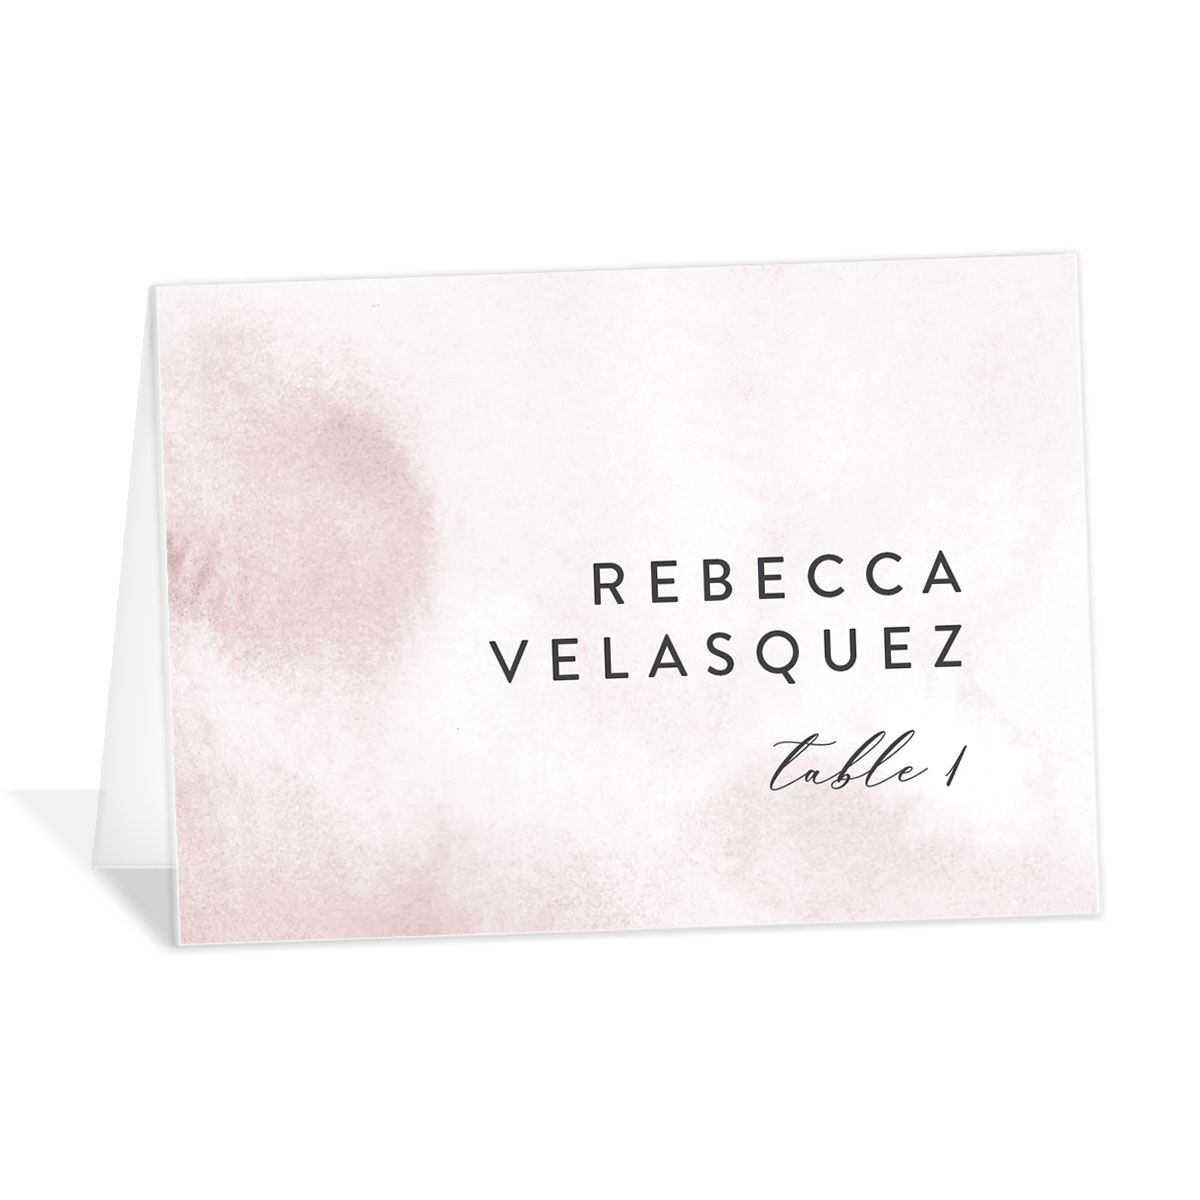 A Wedding Place Card from the Elegant Ethereal Collection